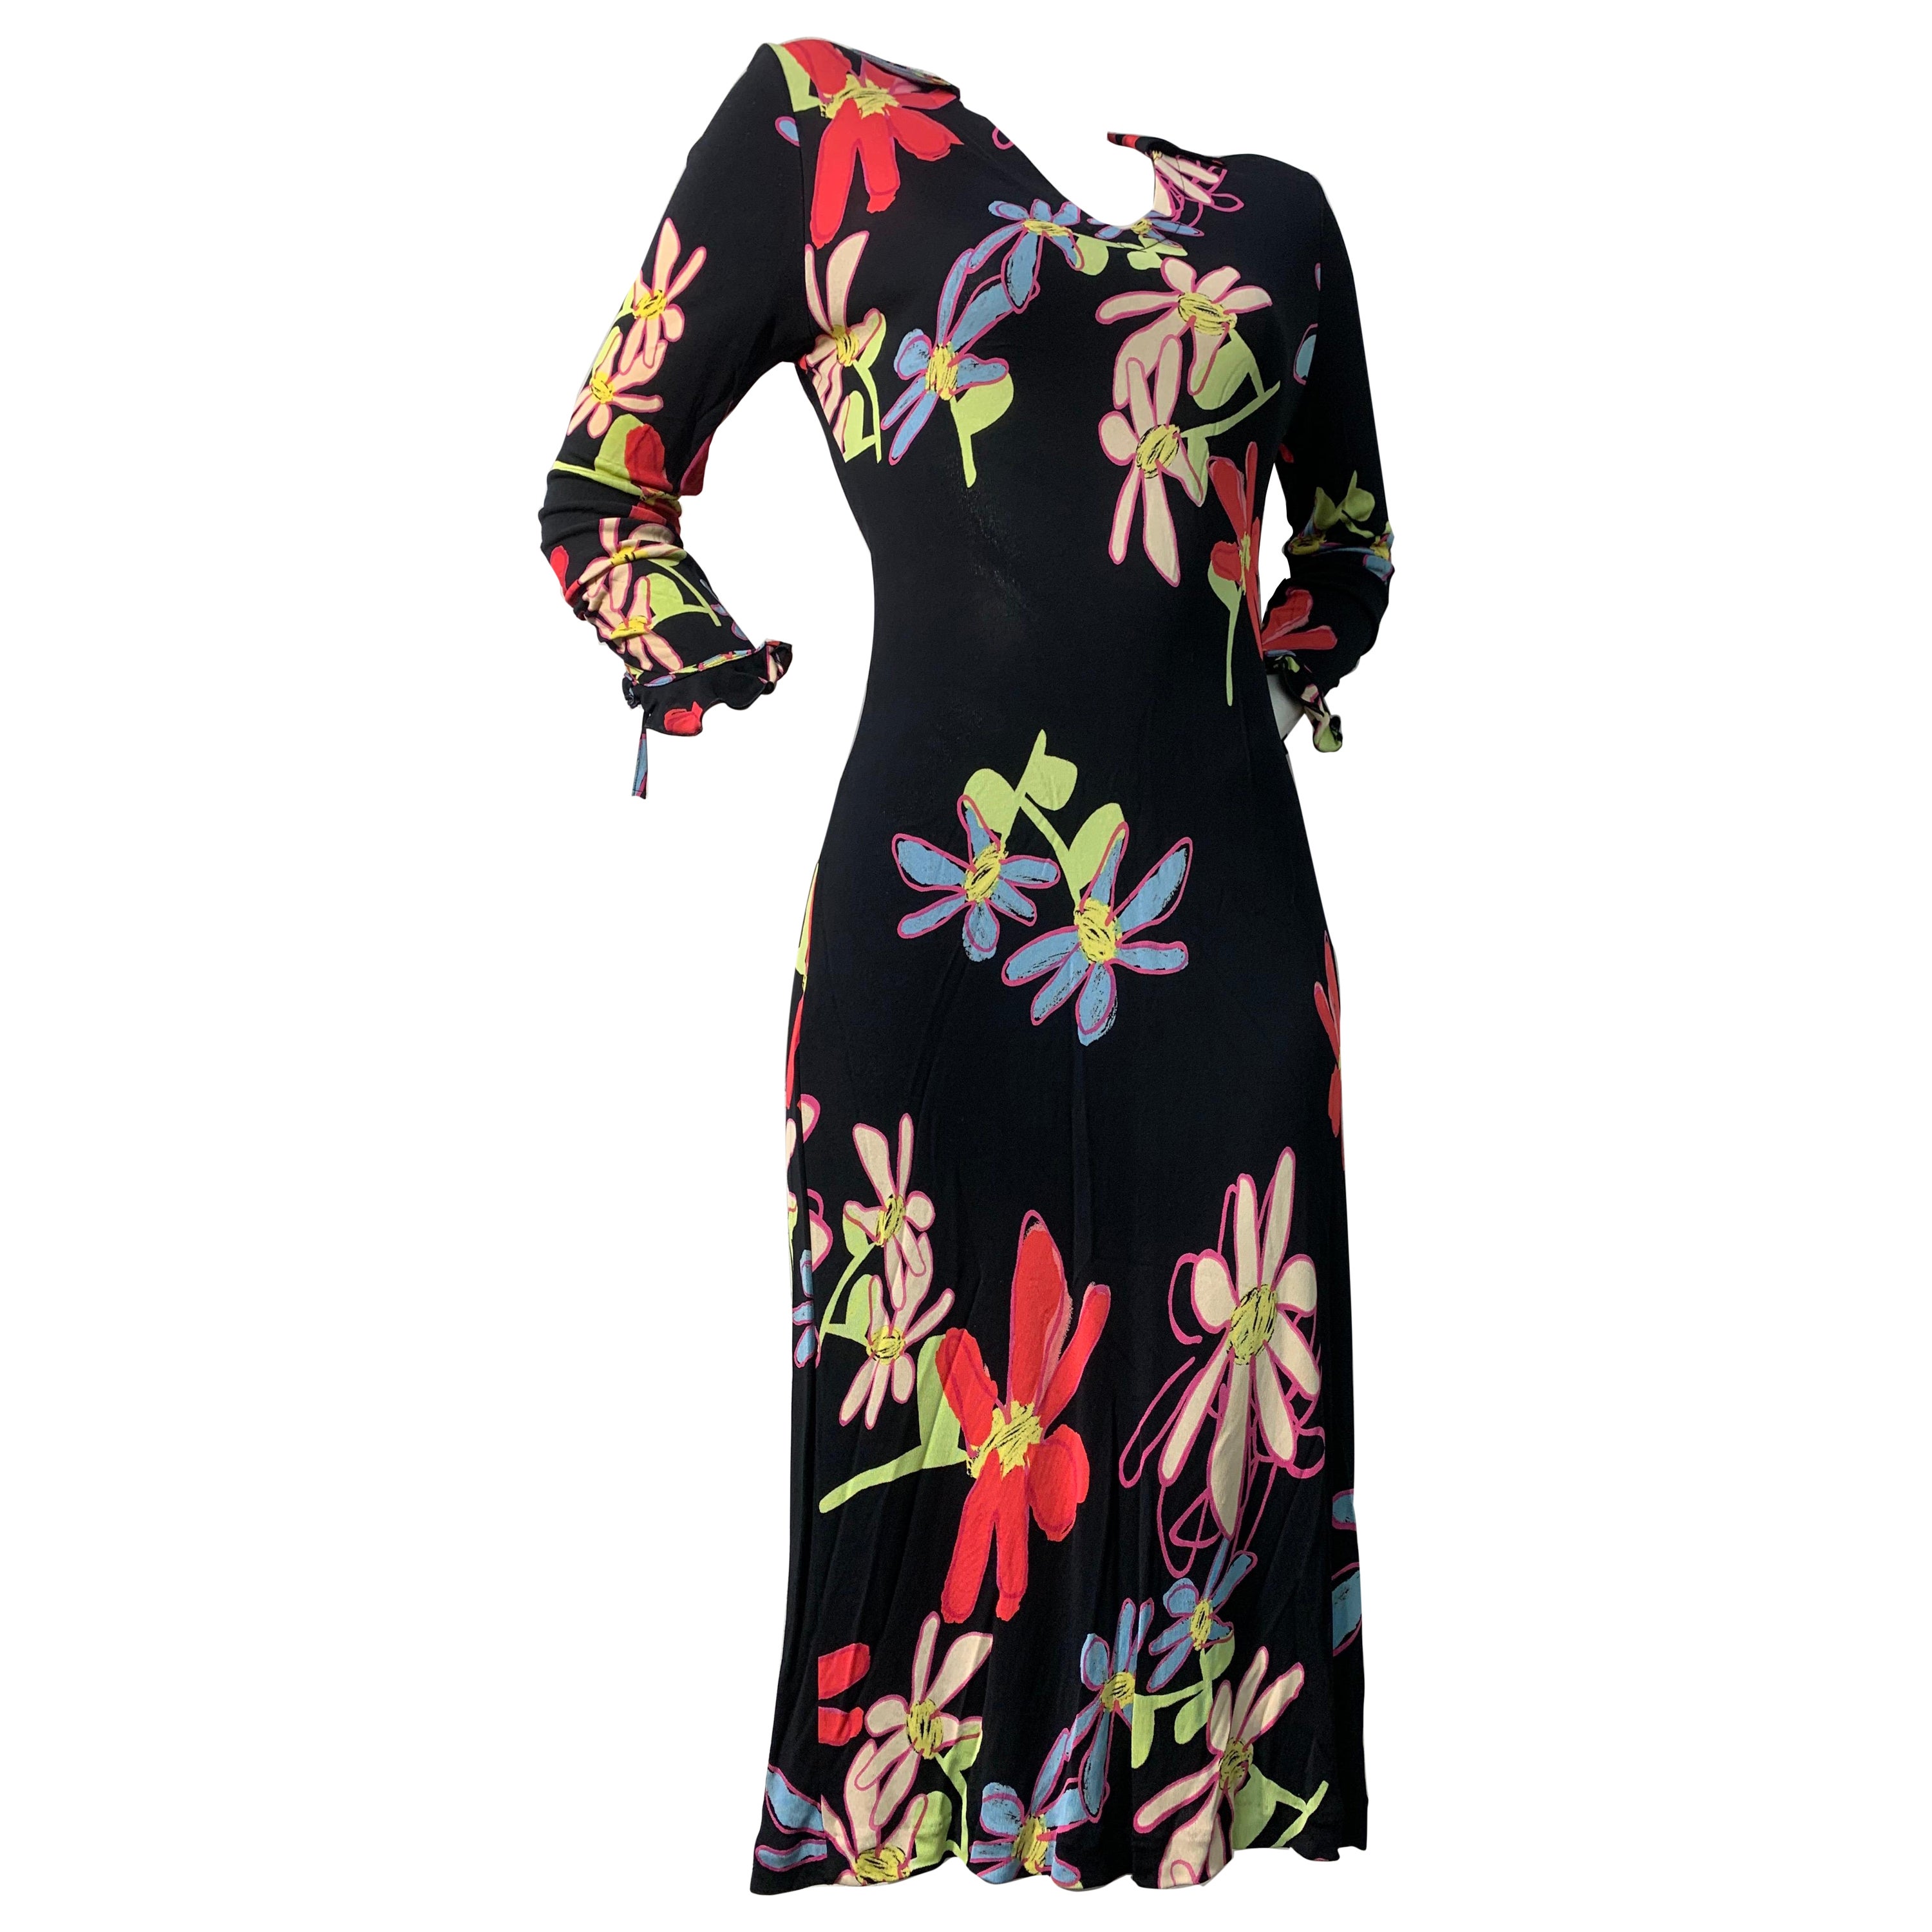 2000 Christian Lacroix Bias Cut 1930s-Inspired Rayon Jersey Floral Print Dress For Sale